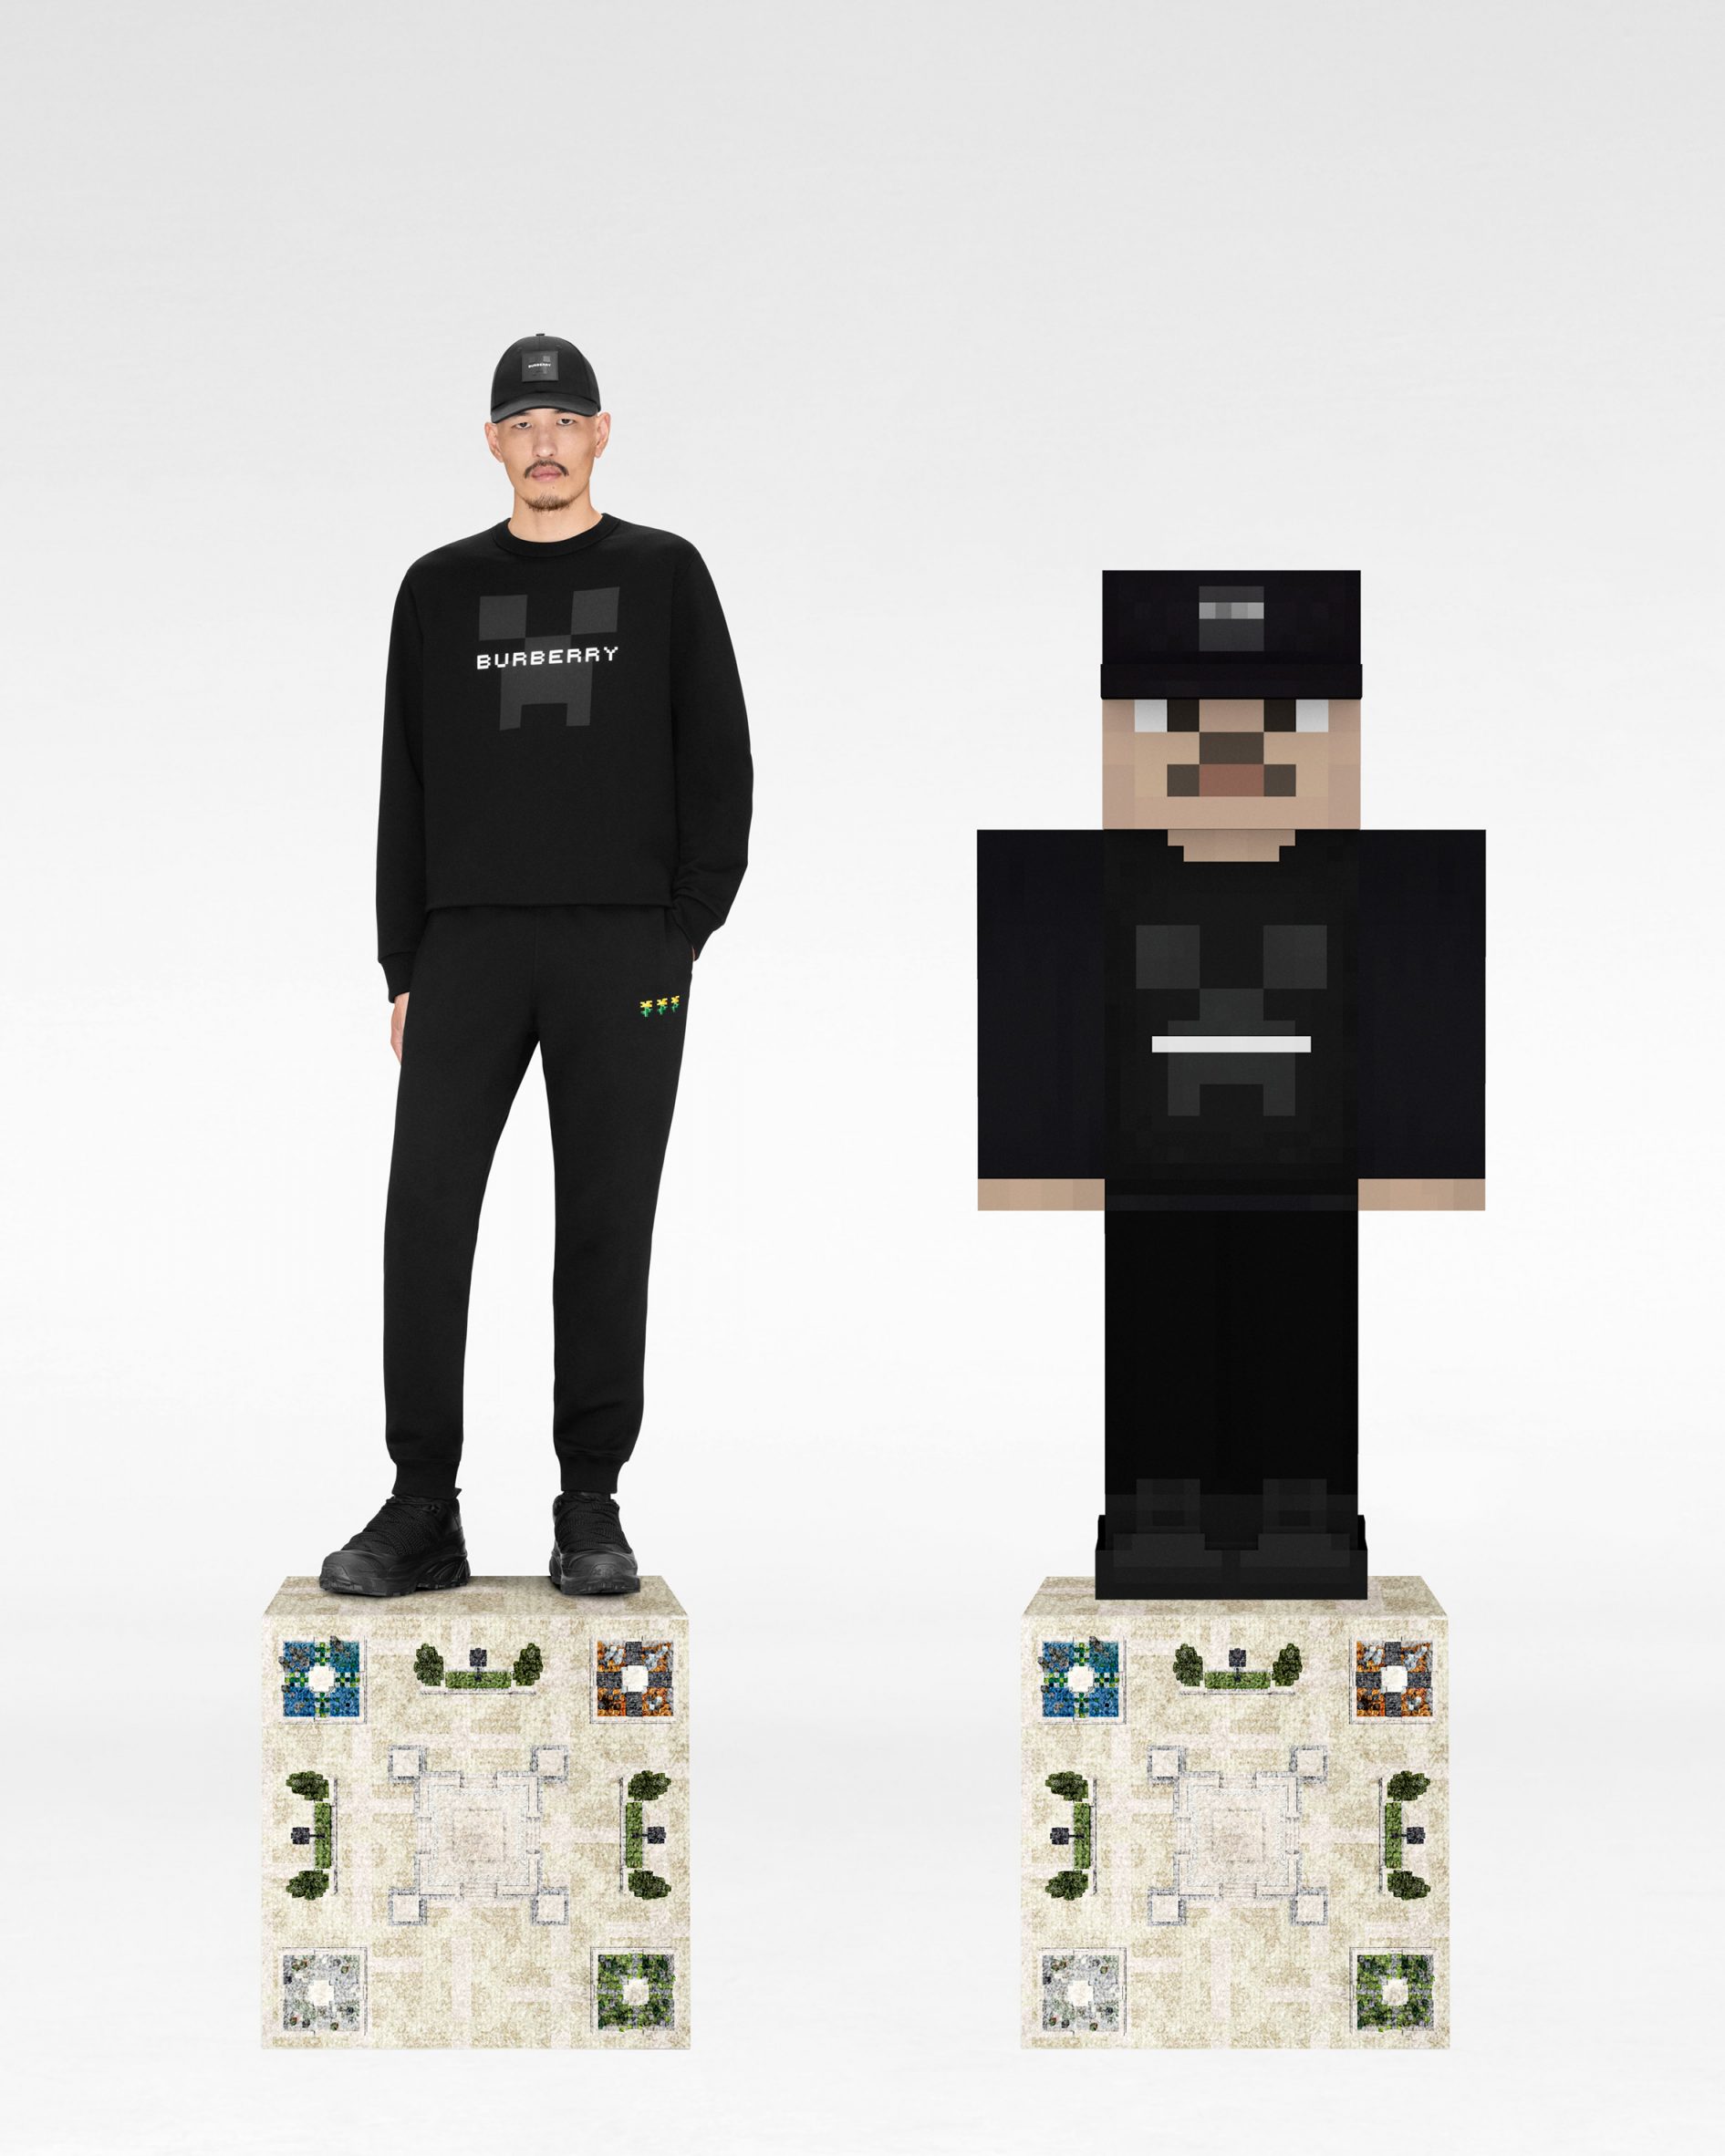 Burberry releases digital clothing collection in video game Minecraft